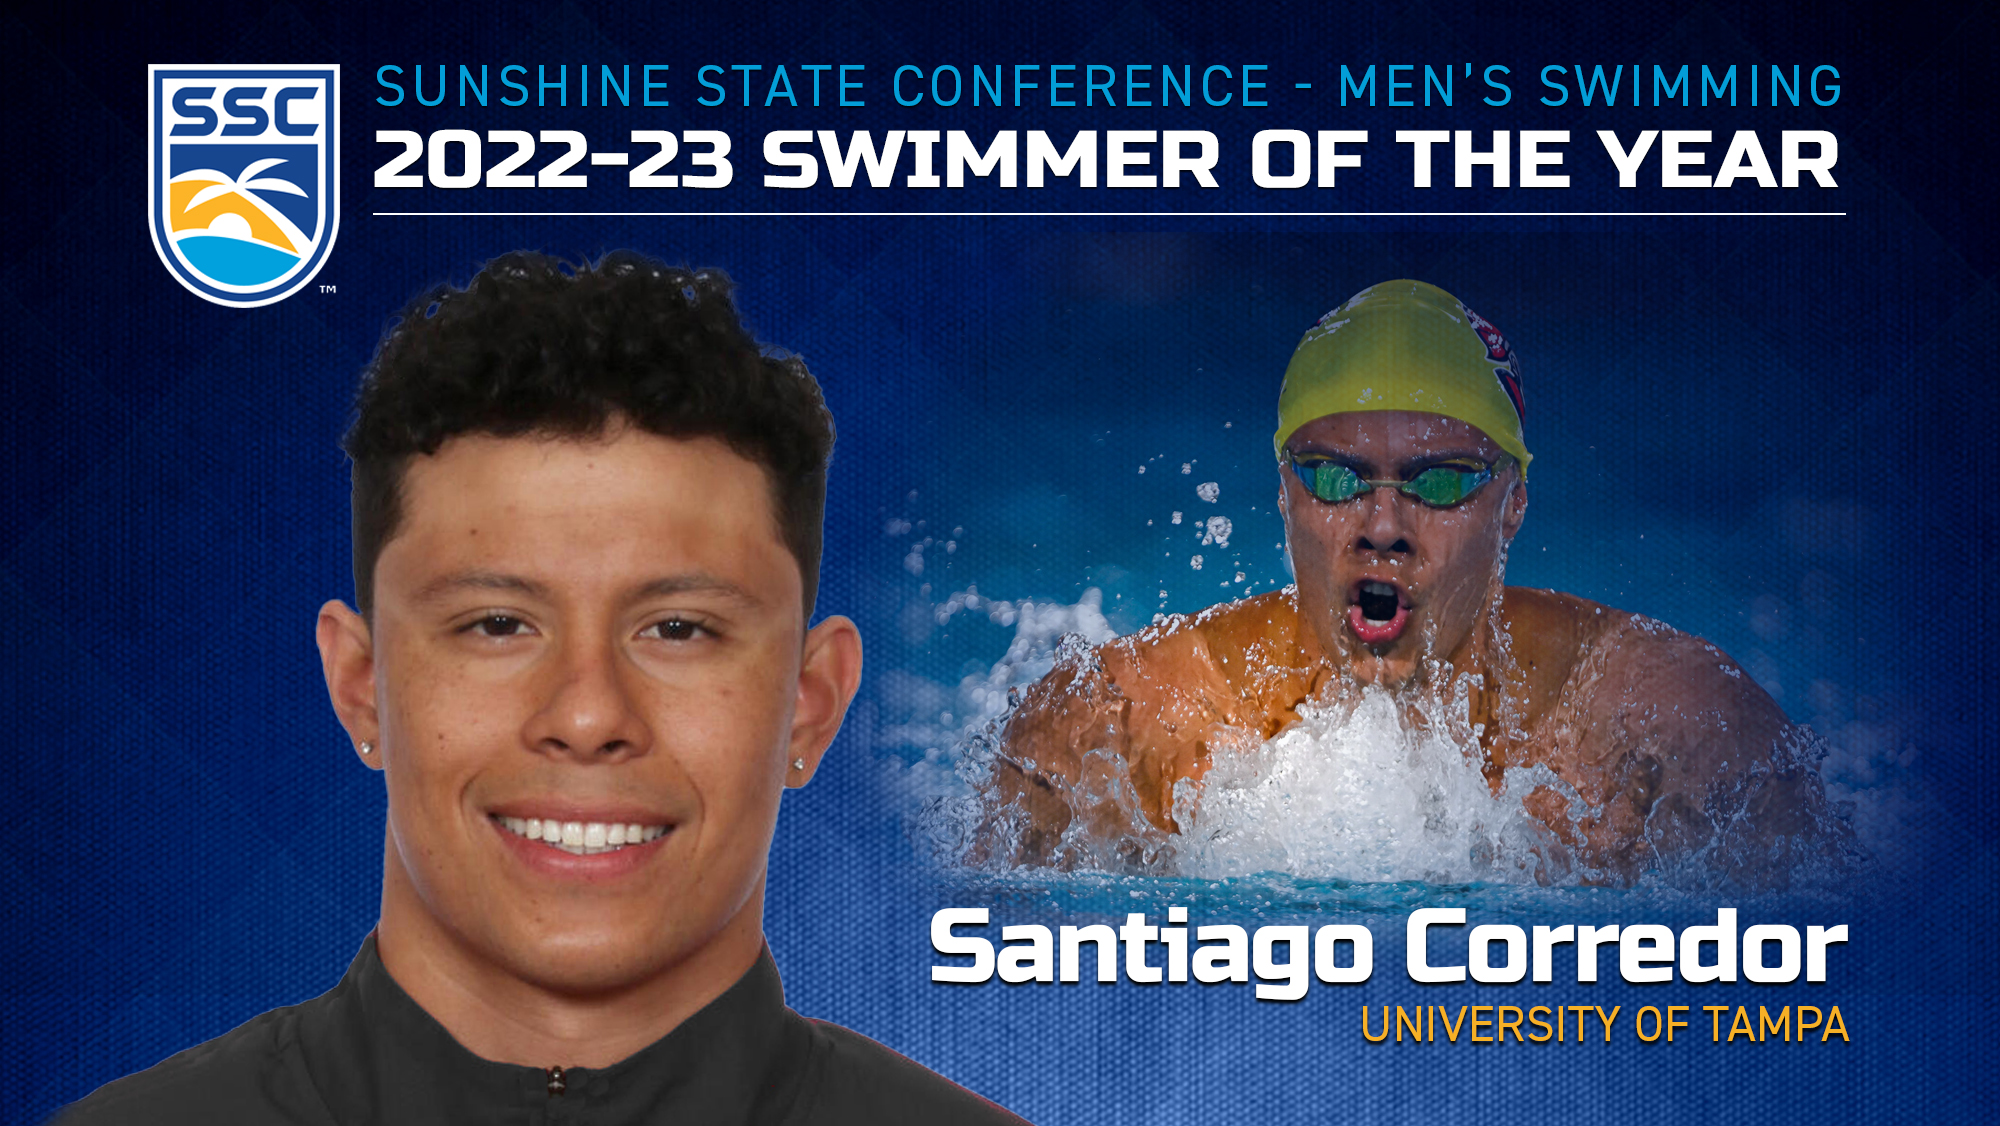 SSC Swimmer of the Year Santiago Corredor